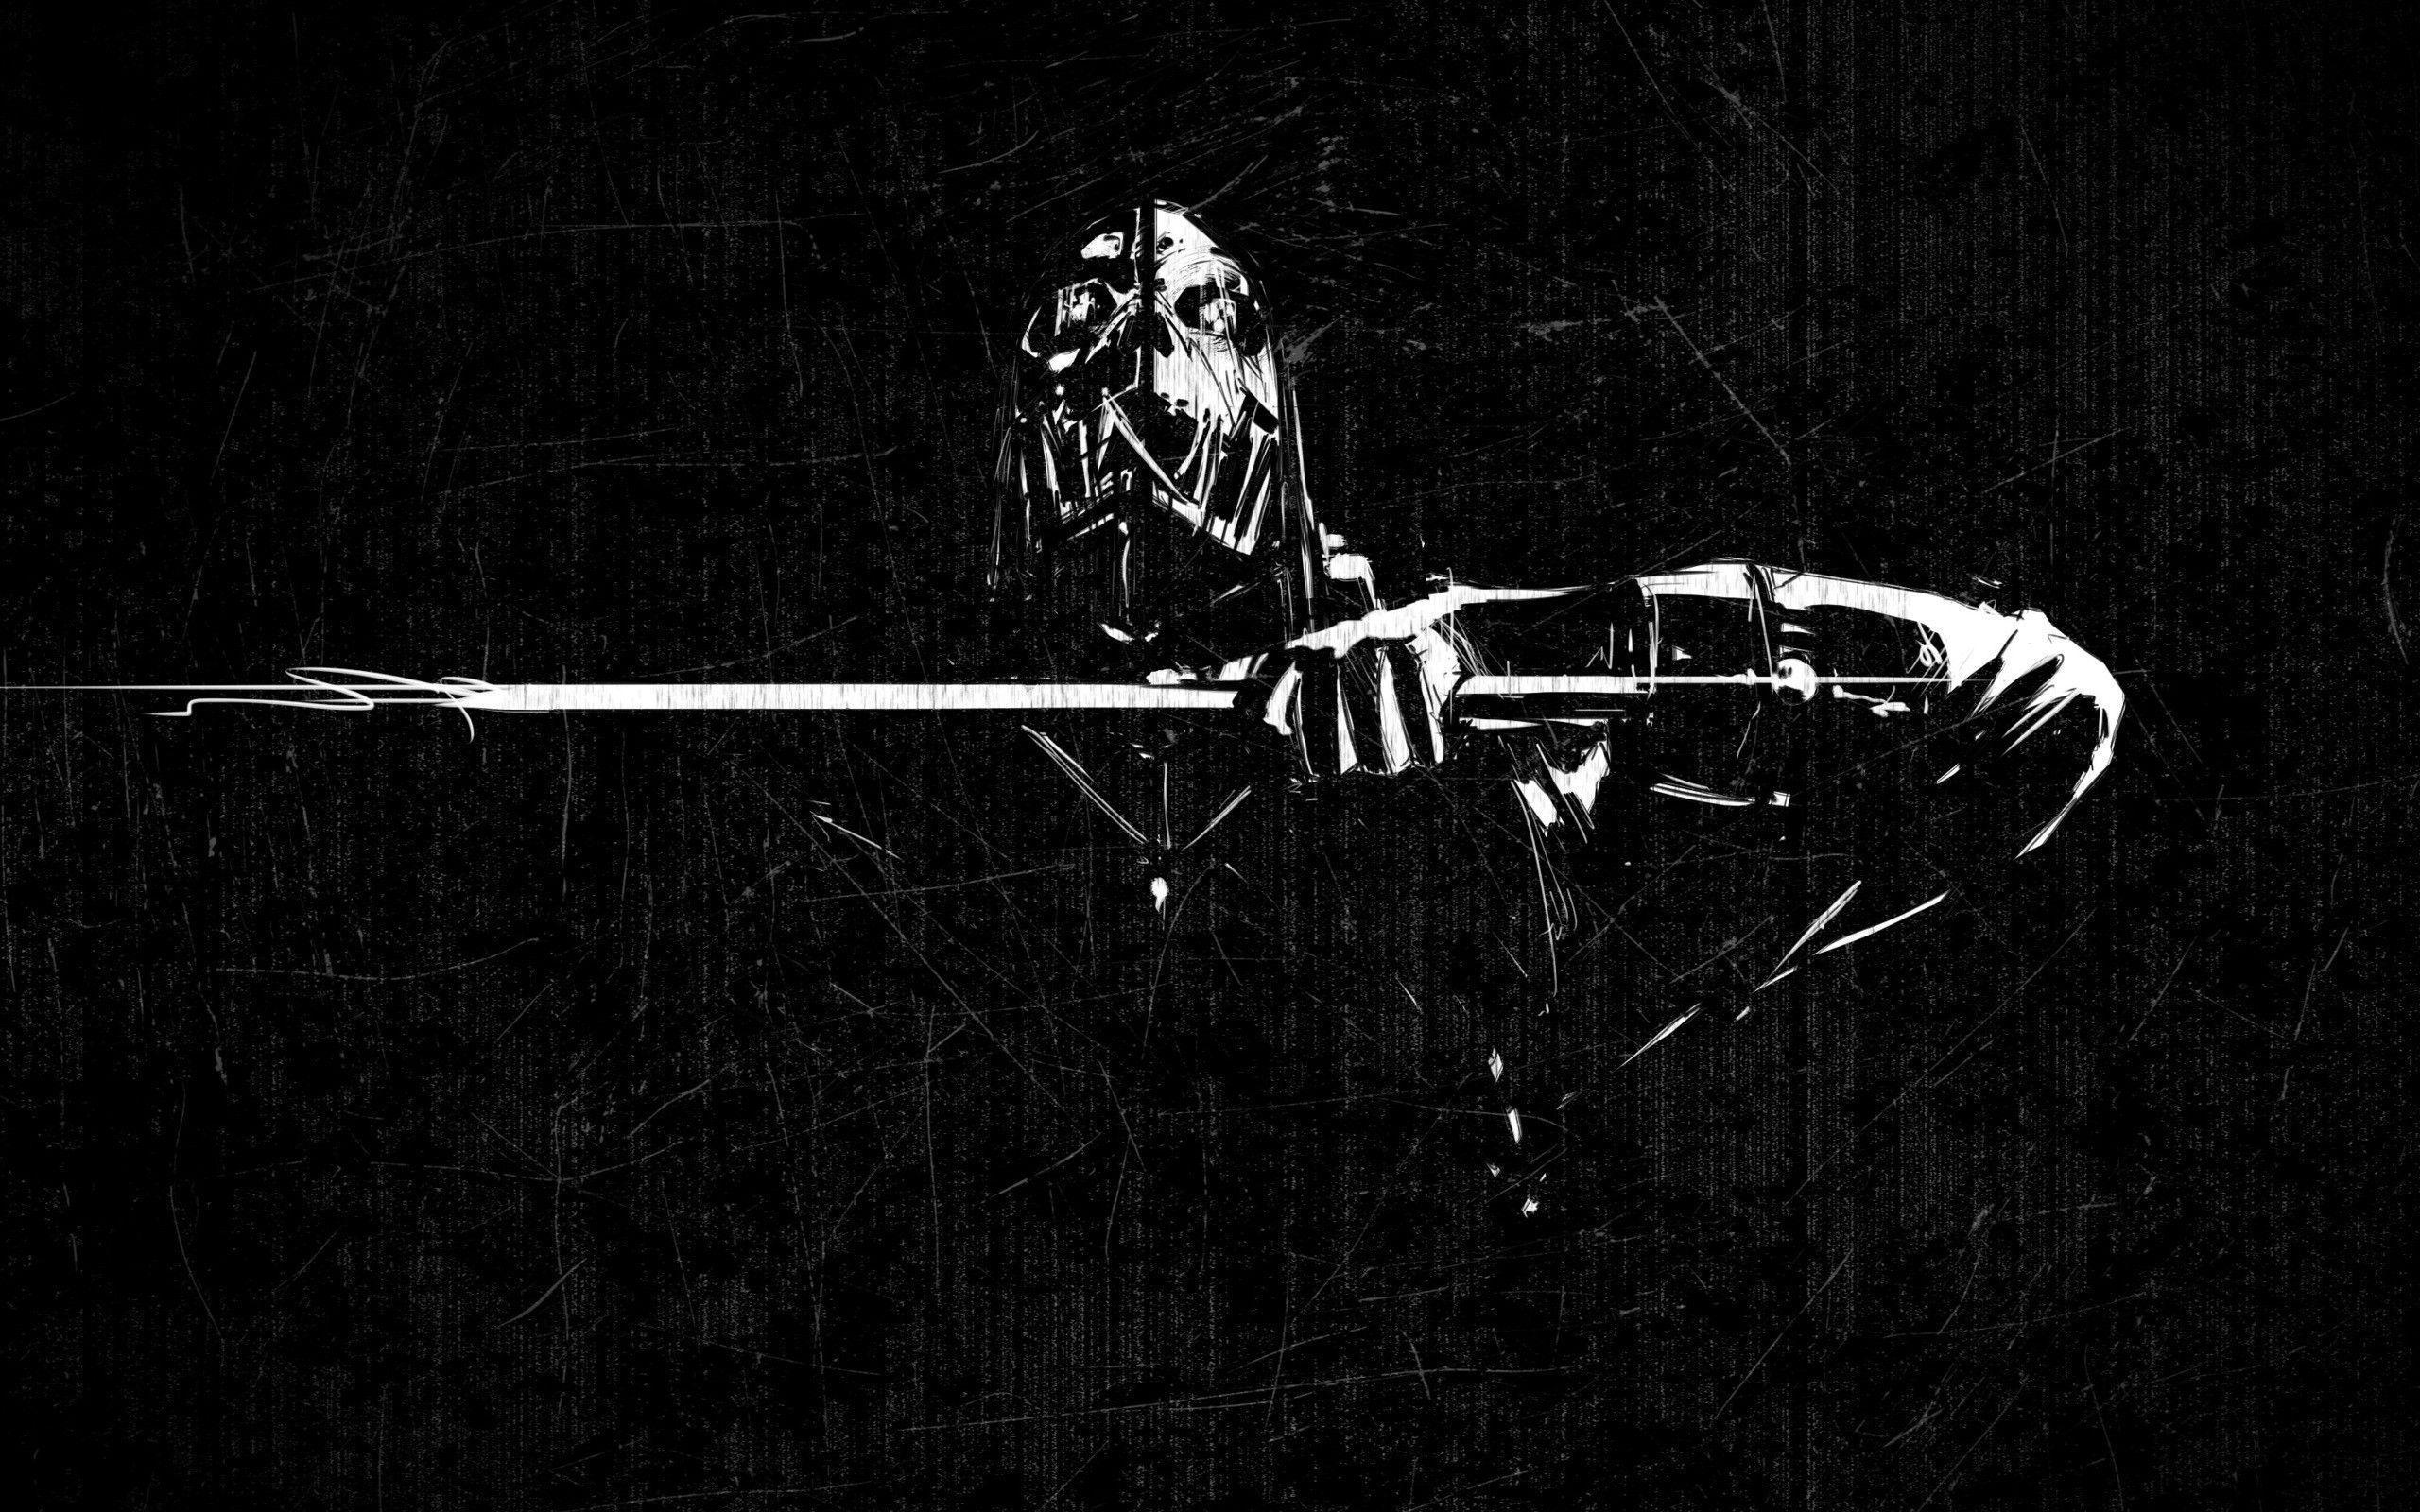 Dishonored Wallpaper, 41 Desktop Image of Dishonored